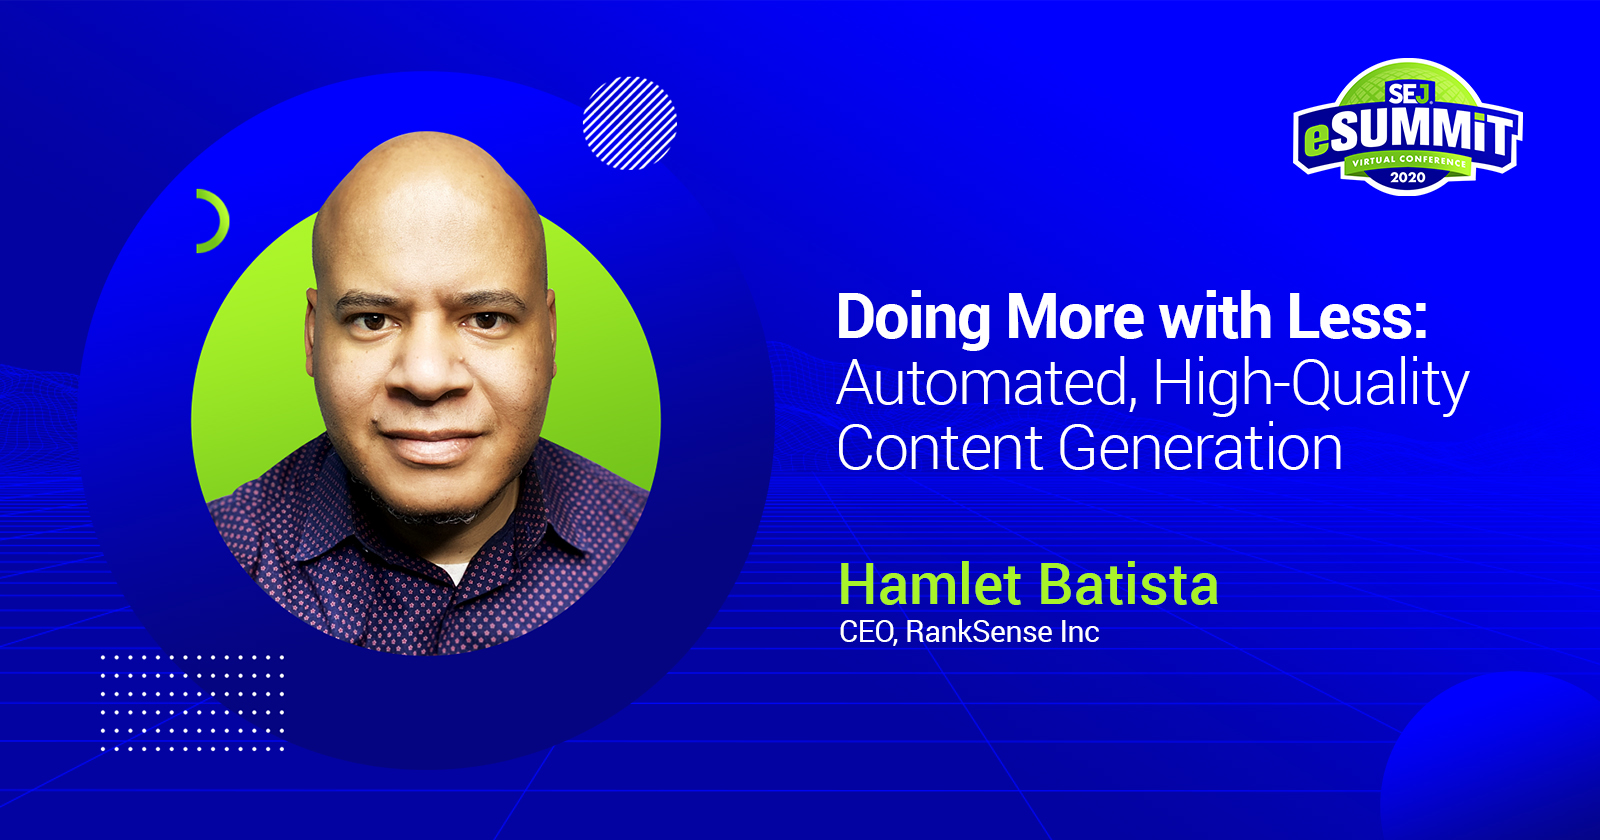 Hamet Batista - Doing More with Less - Automated, High-Quality Content Generation